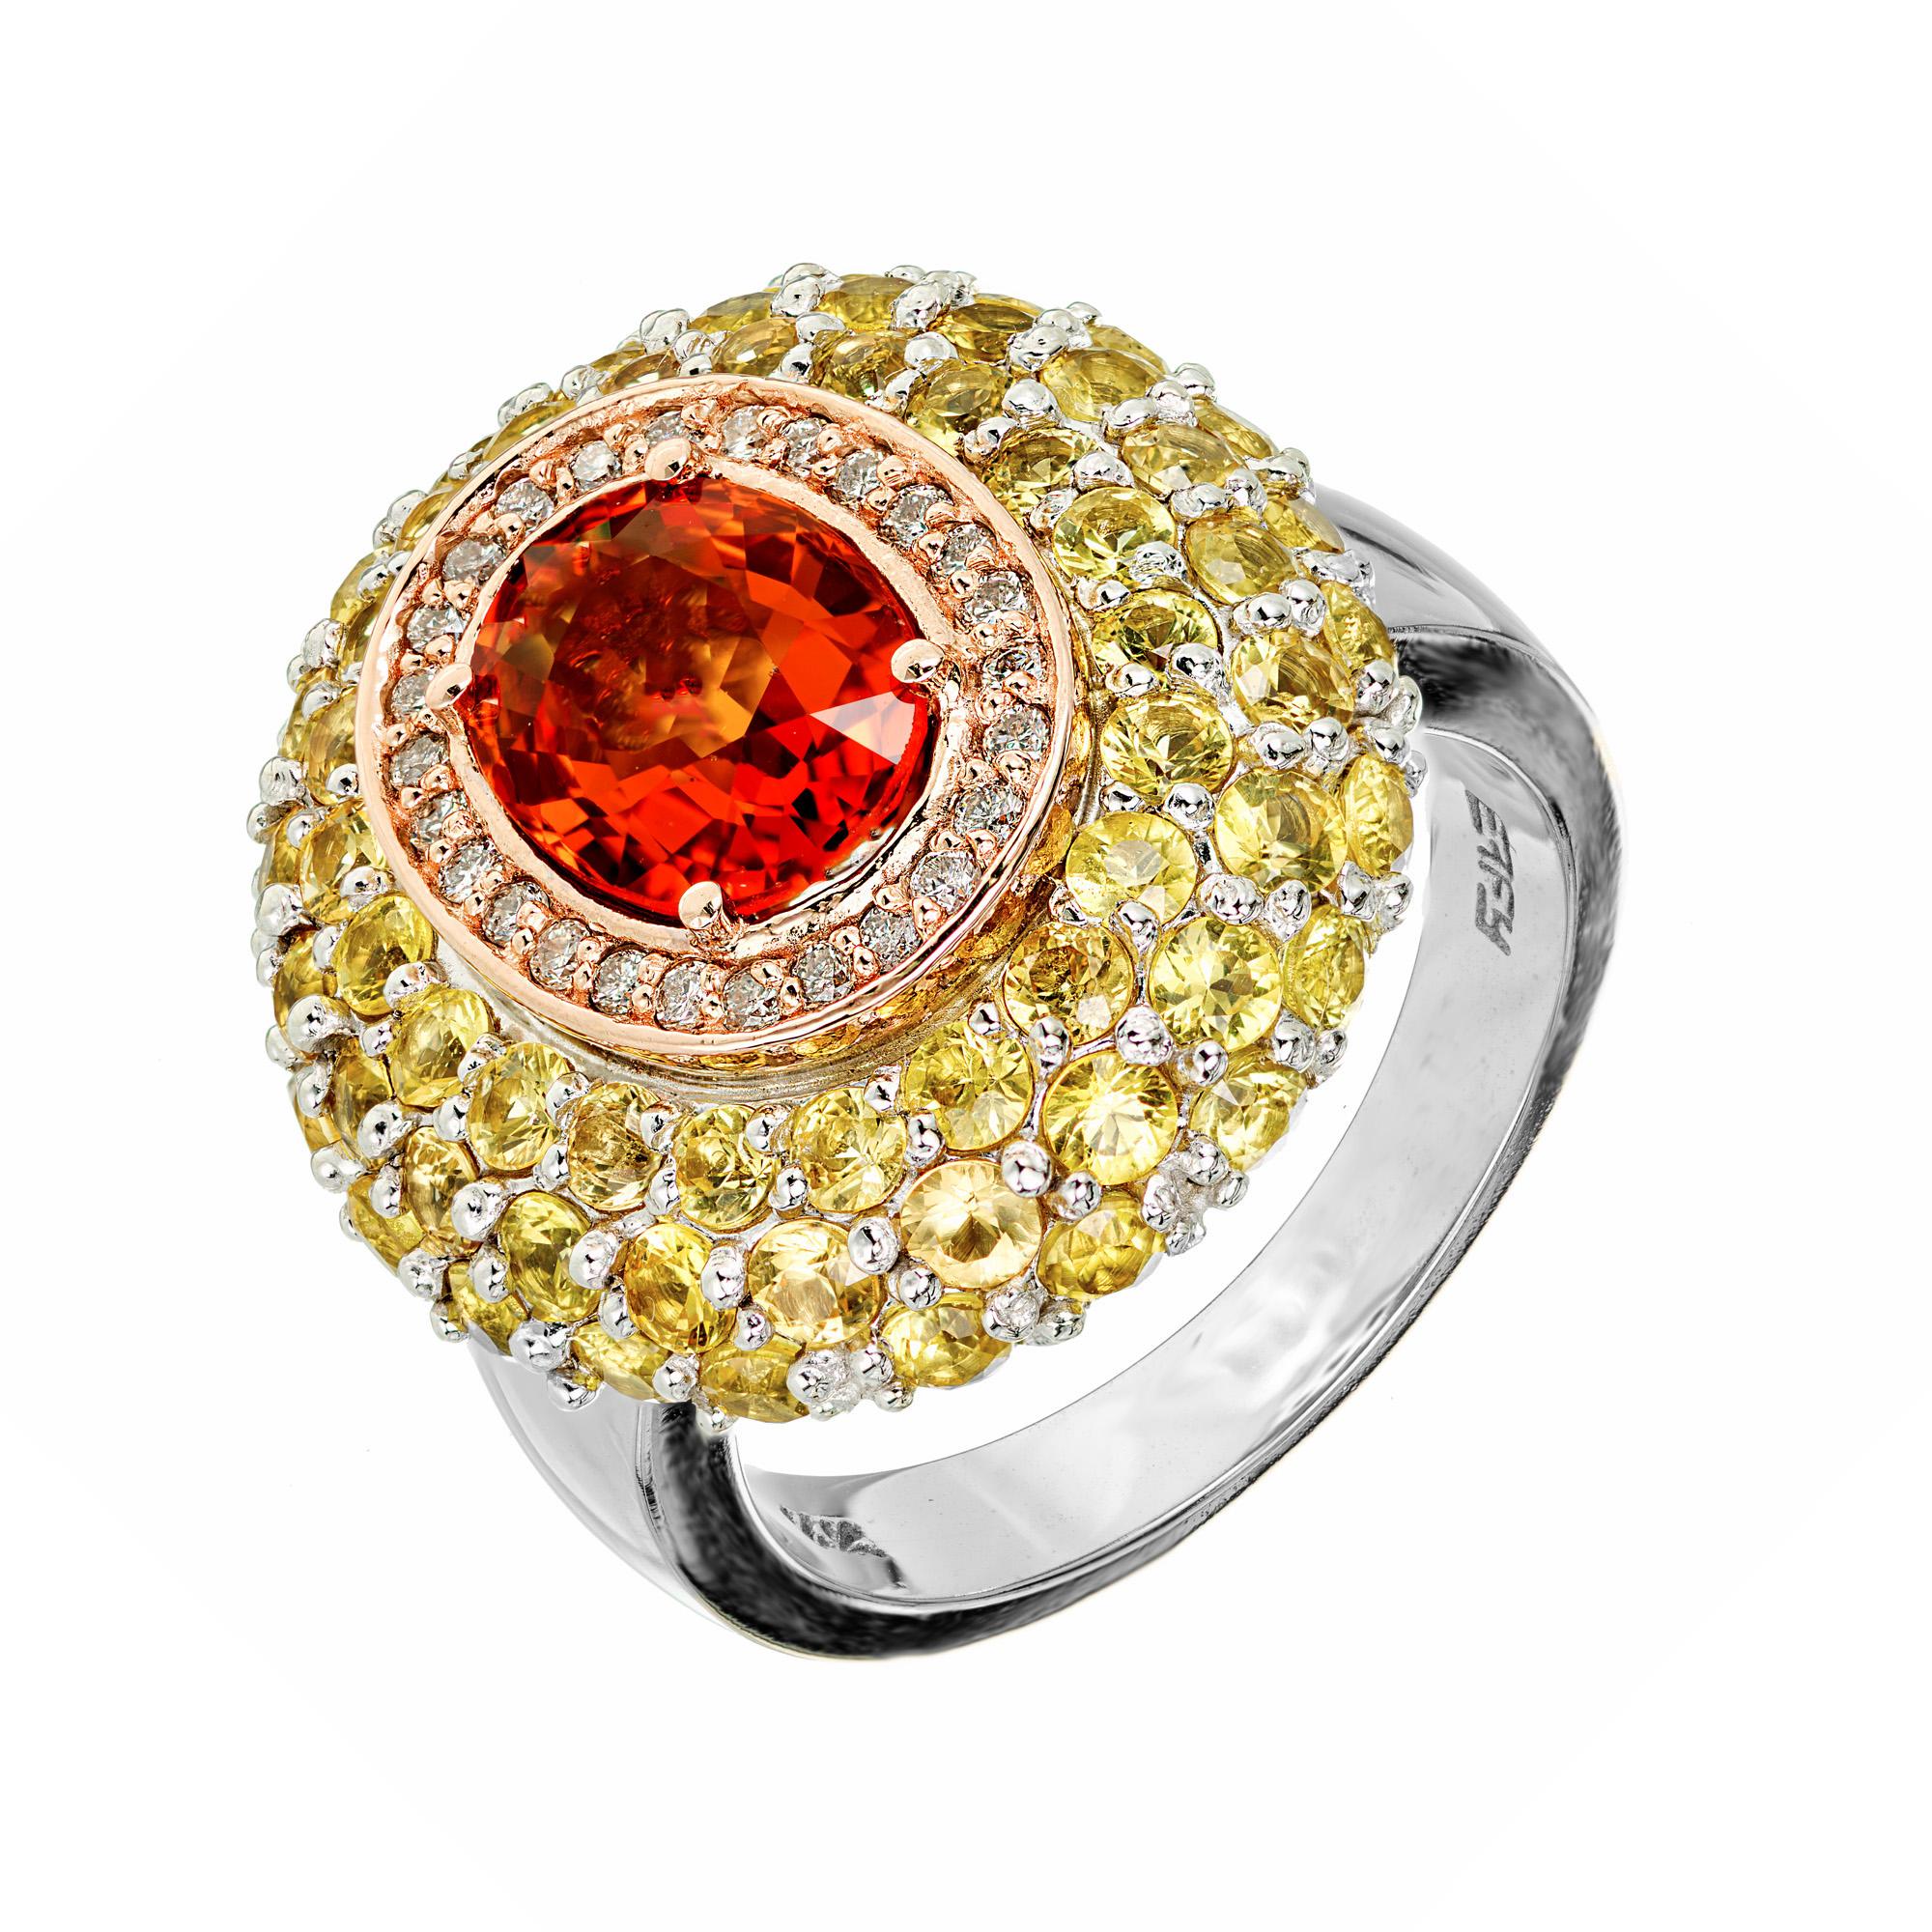 Designer Effy sapphire and diamond ring. Bright orange oval sapphire center stone with a halo of rose gold bezel set white diamonds and a halo cluster of 66 round yellow sapphires, set in 14k white and rose gold.

1 oval orange sapphire, approx.